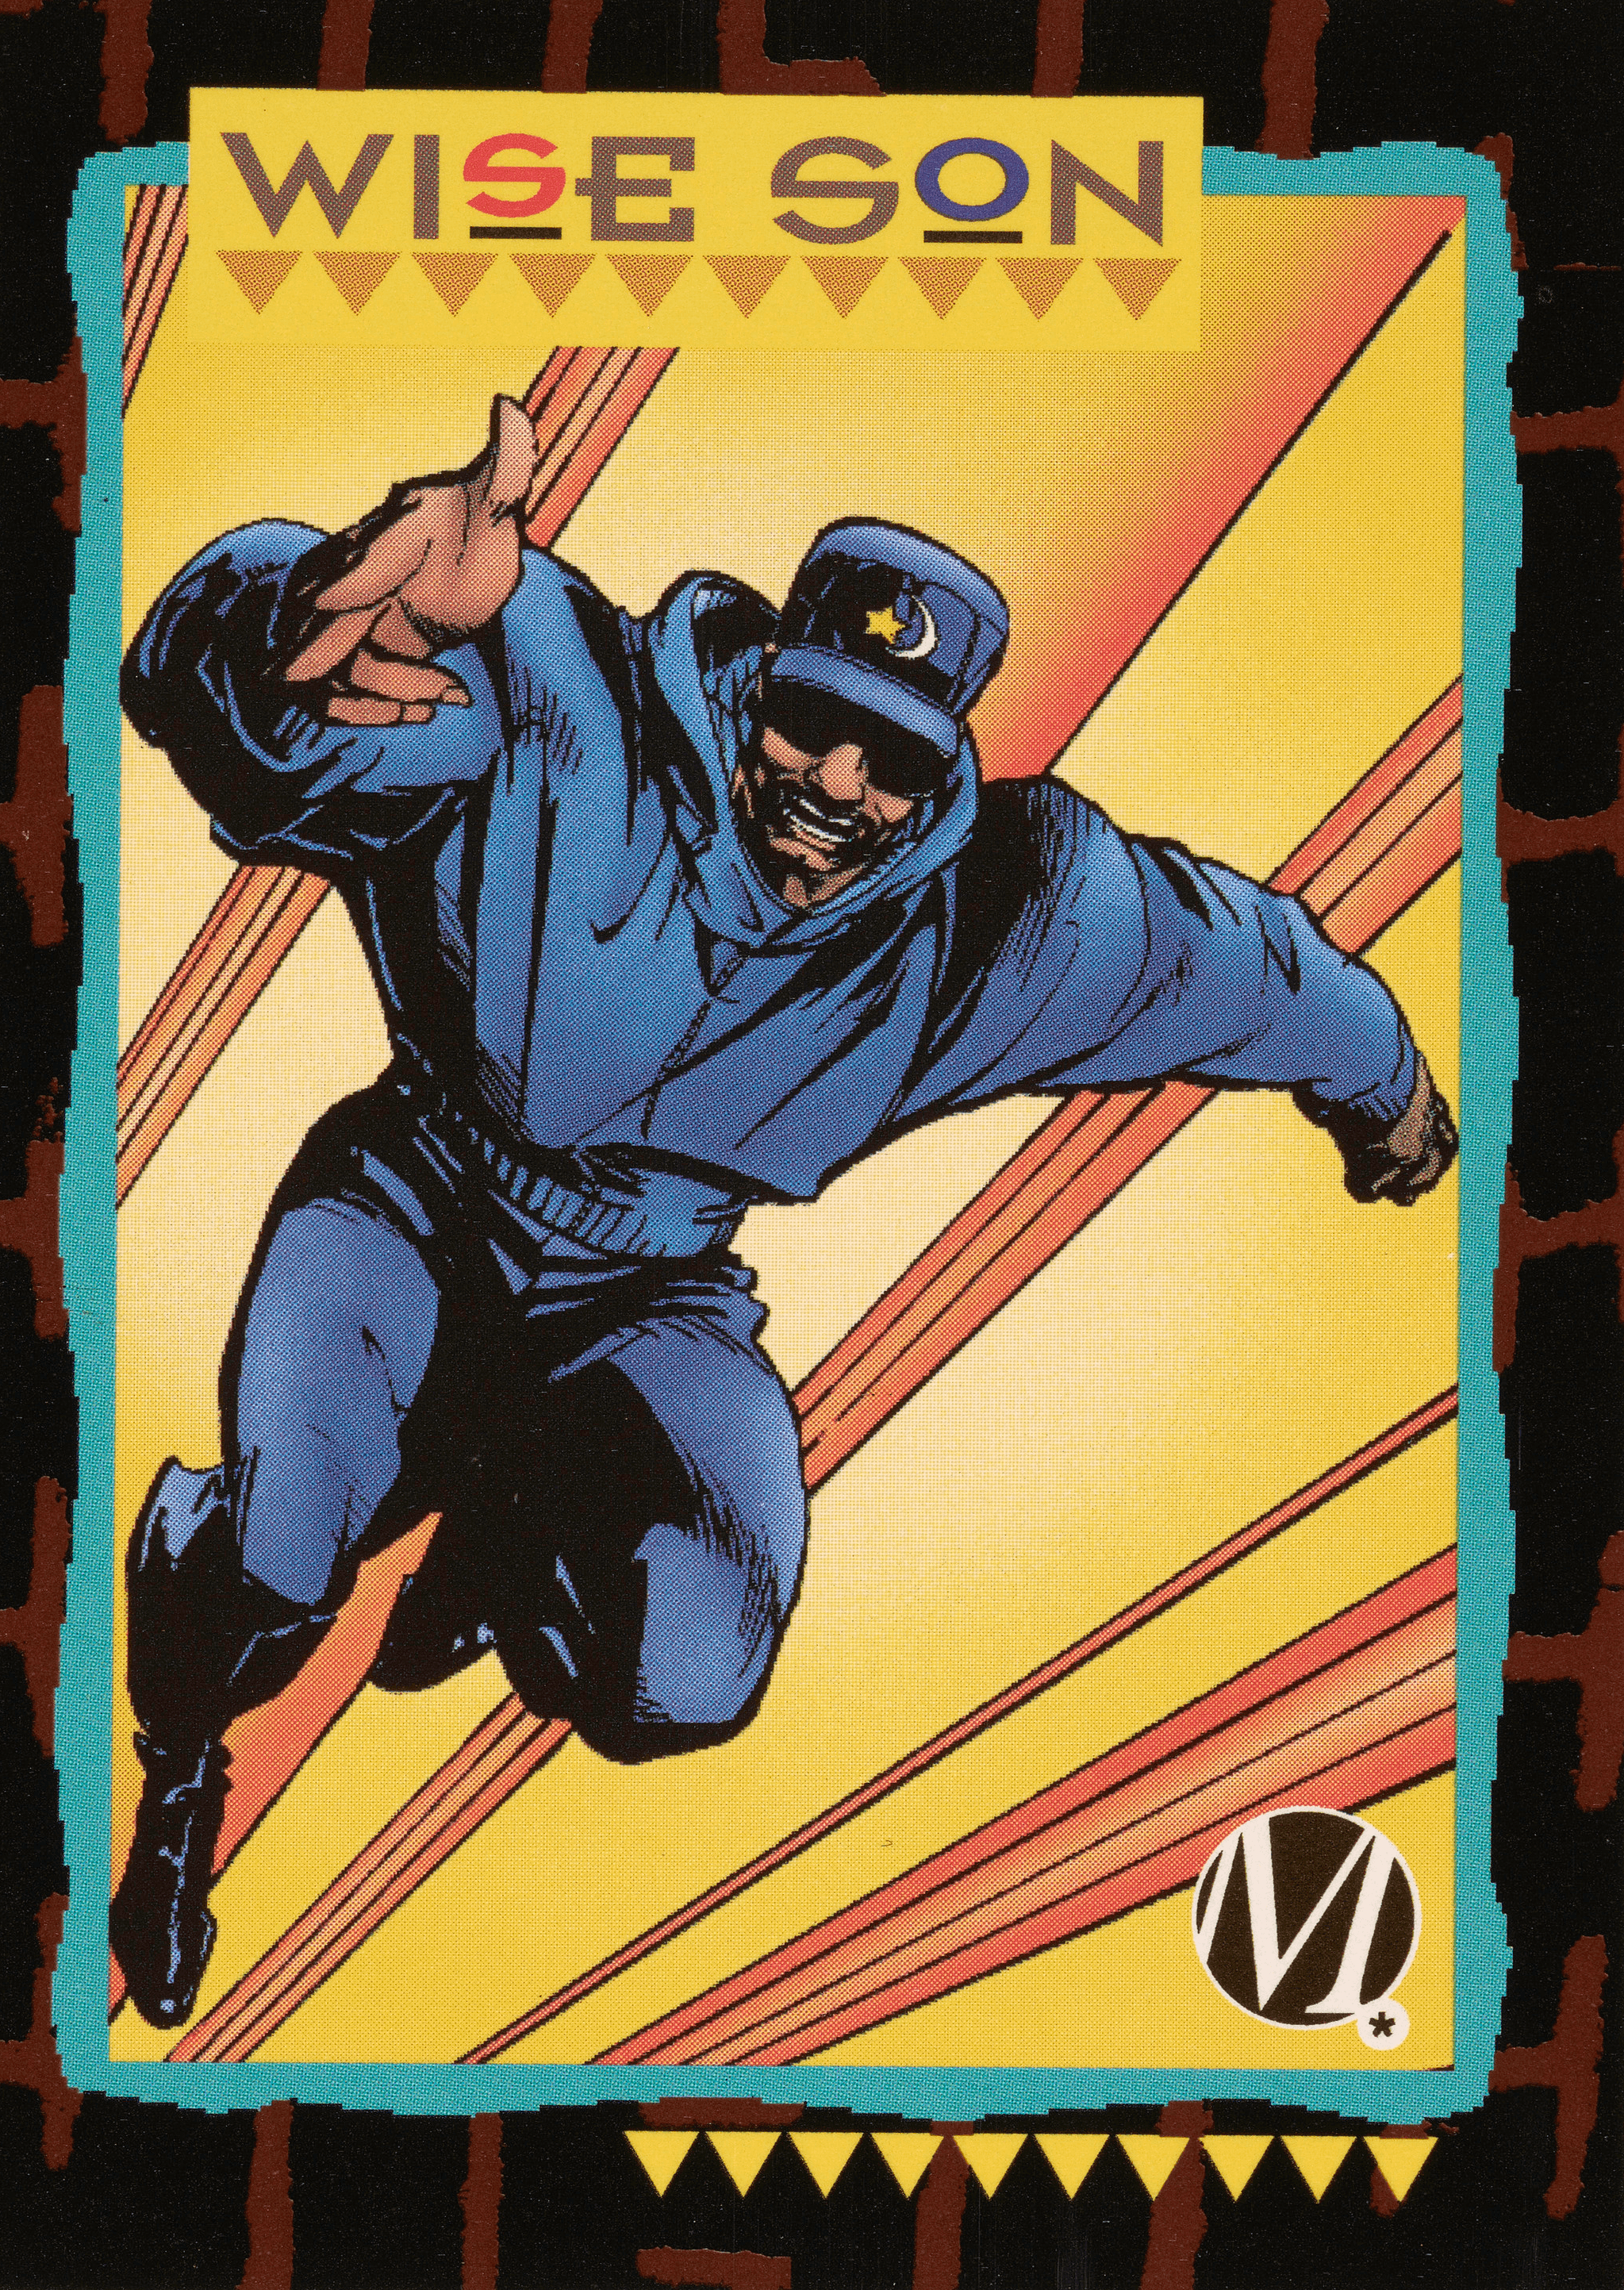 A Milestone trading card with a color image of the character Wise Son.